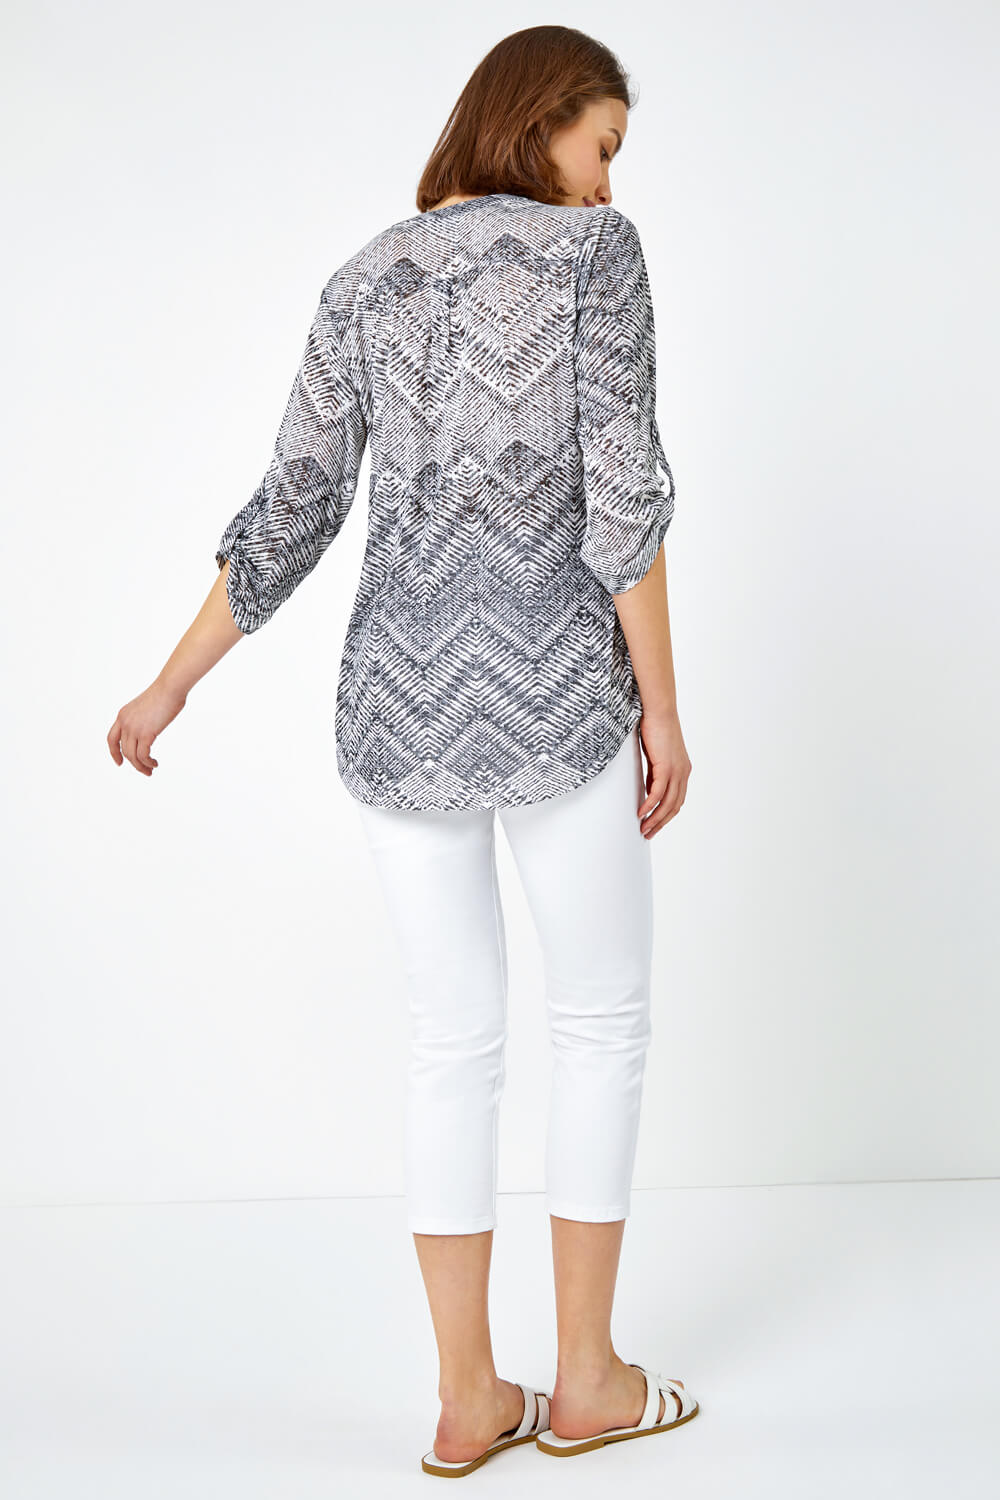 Black Textured Aztec Print Relaxed Shirt, Image 3 of 5